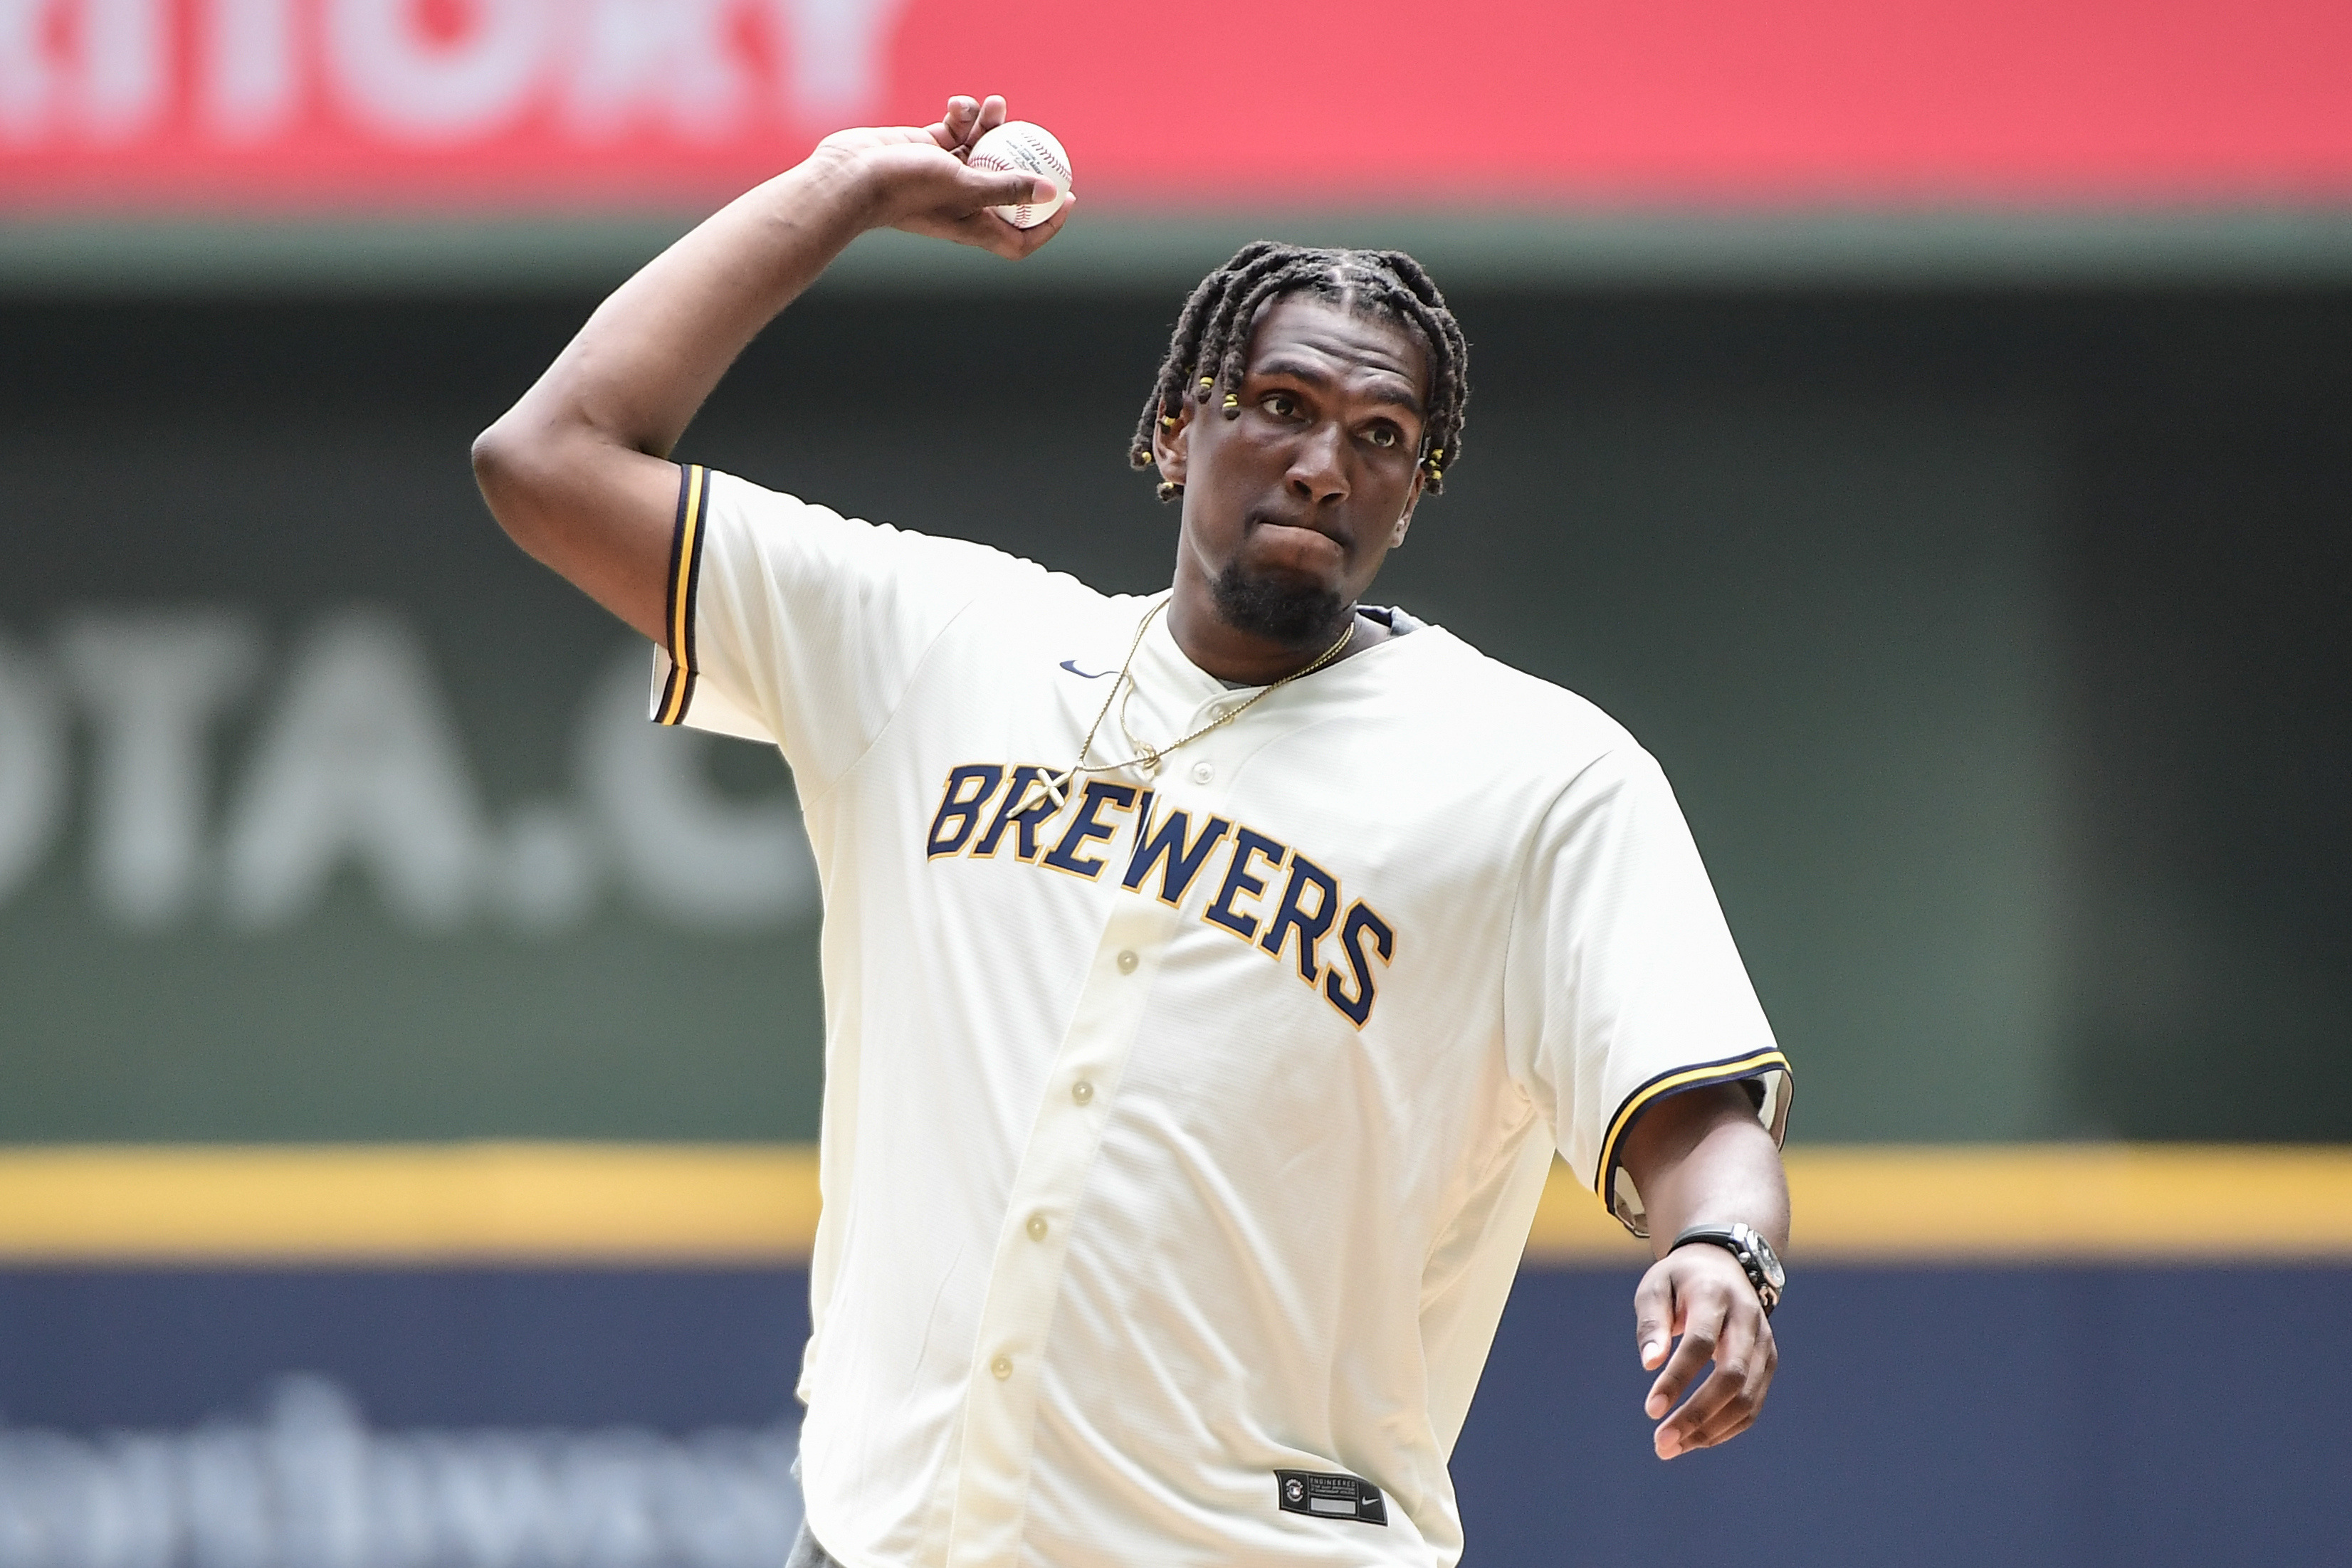 Have the Brewers adequately replaced Fielder?